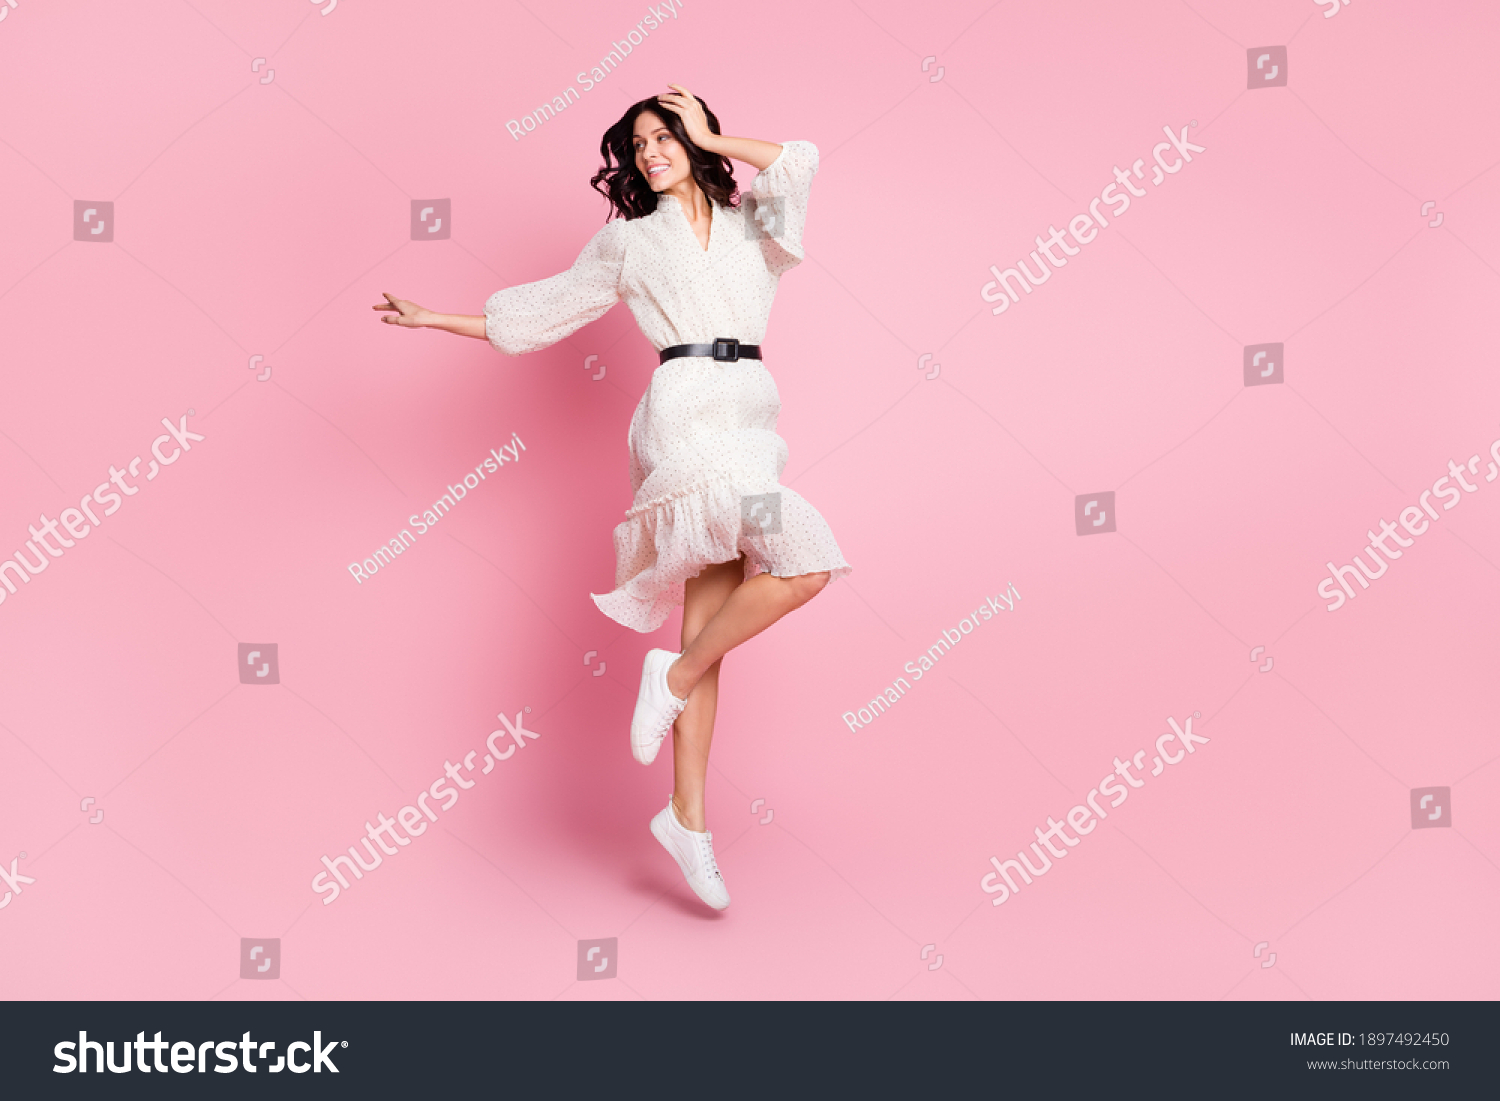 Full length body size photo of cheerful woman in long dress jumping looking empty space isolated pastel pink color background #1897492450